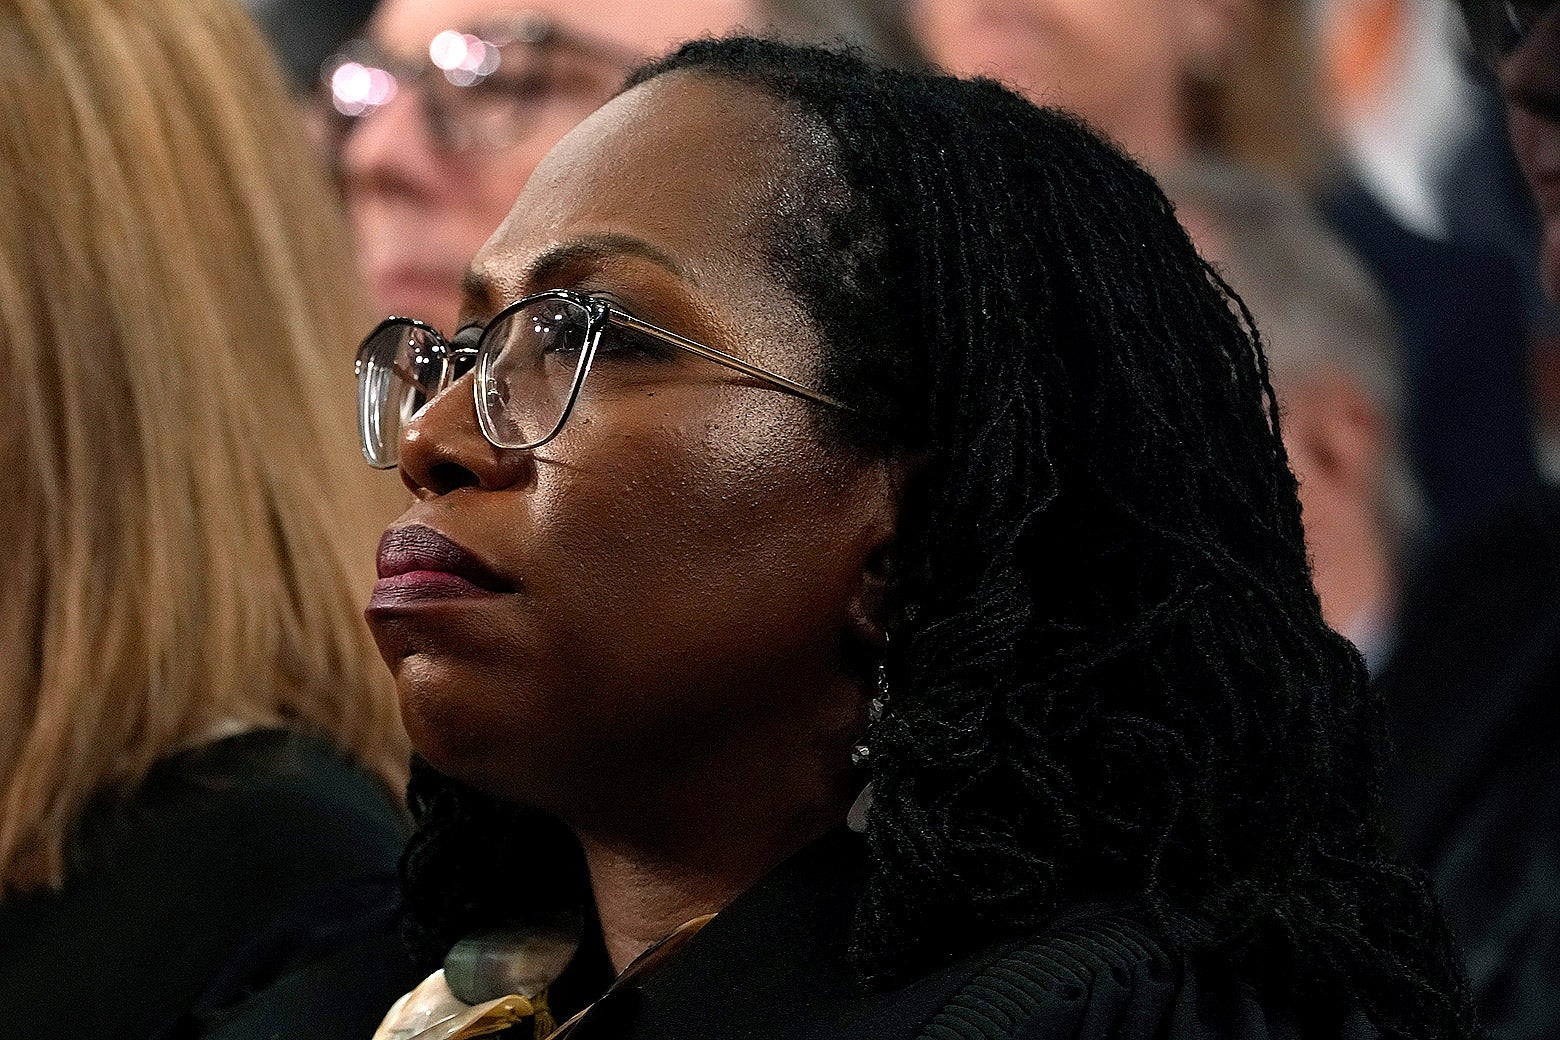 Justice Ketanji Brown Jackson at the State of the Union address credit Jacquelyn Martin, Pool, Getty Images